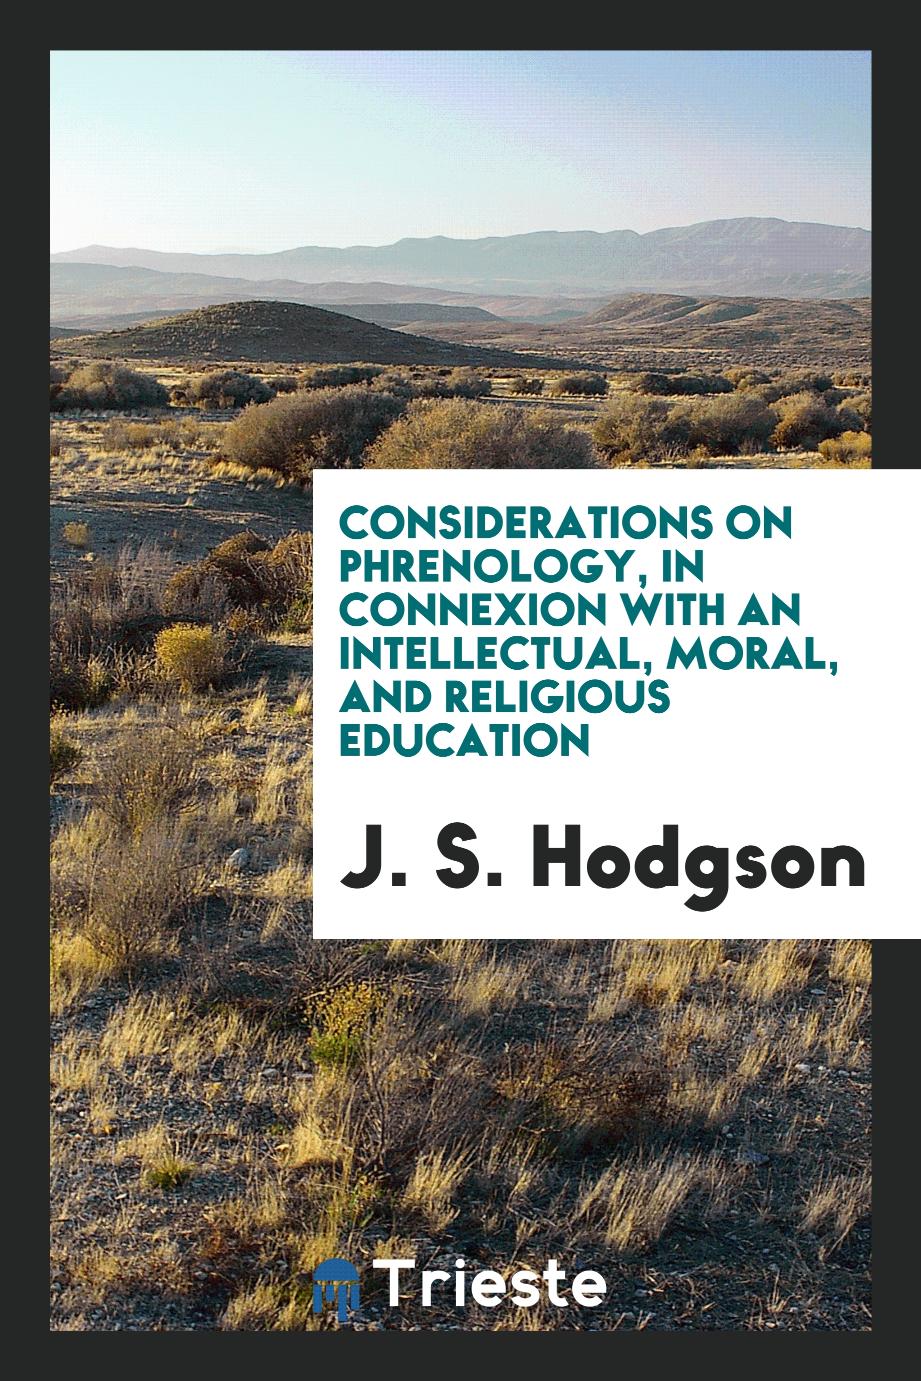 Considerations on Phrenology, in Connexion with an Intellectual, Moral, and Religious Education